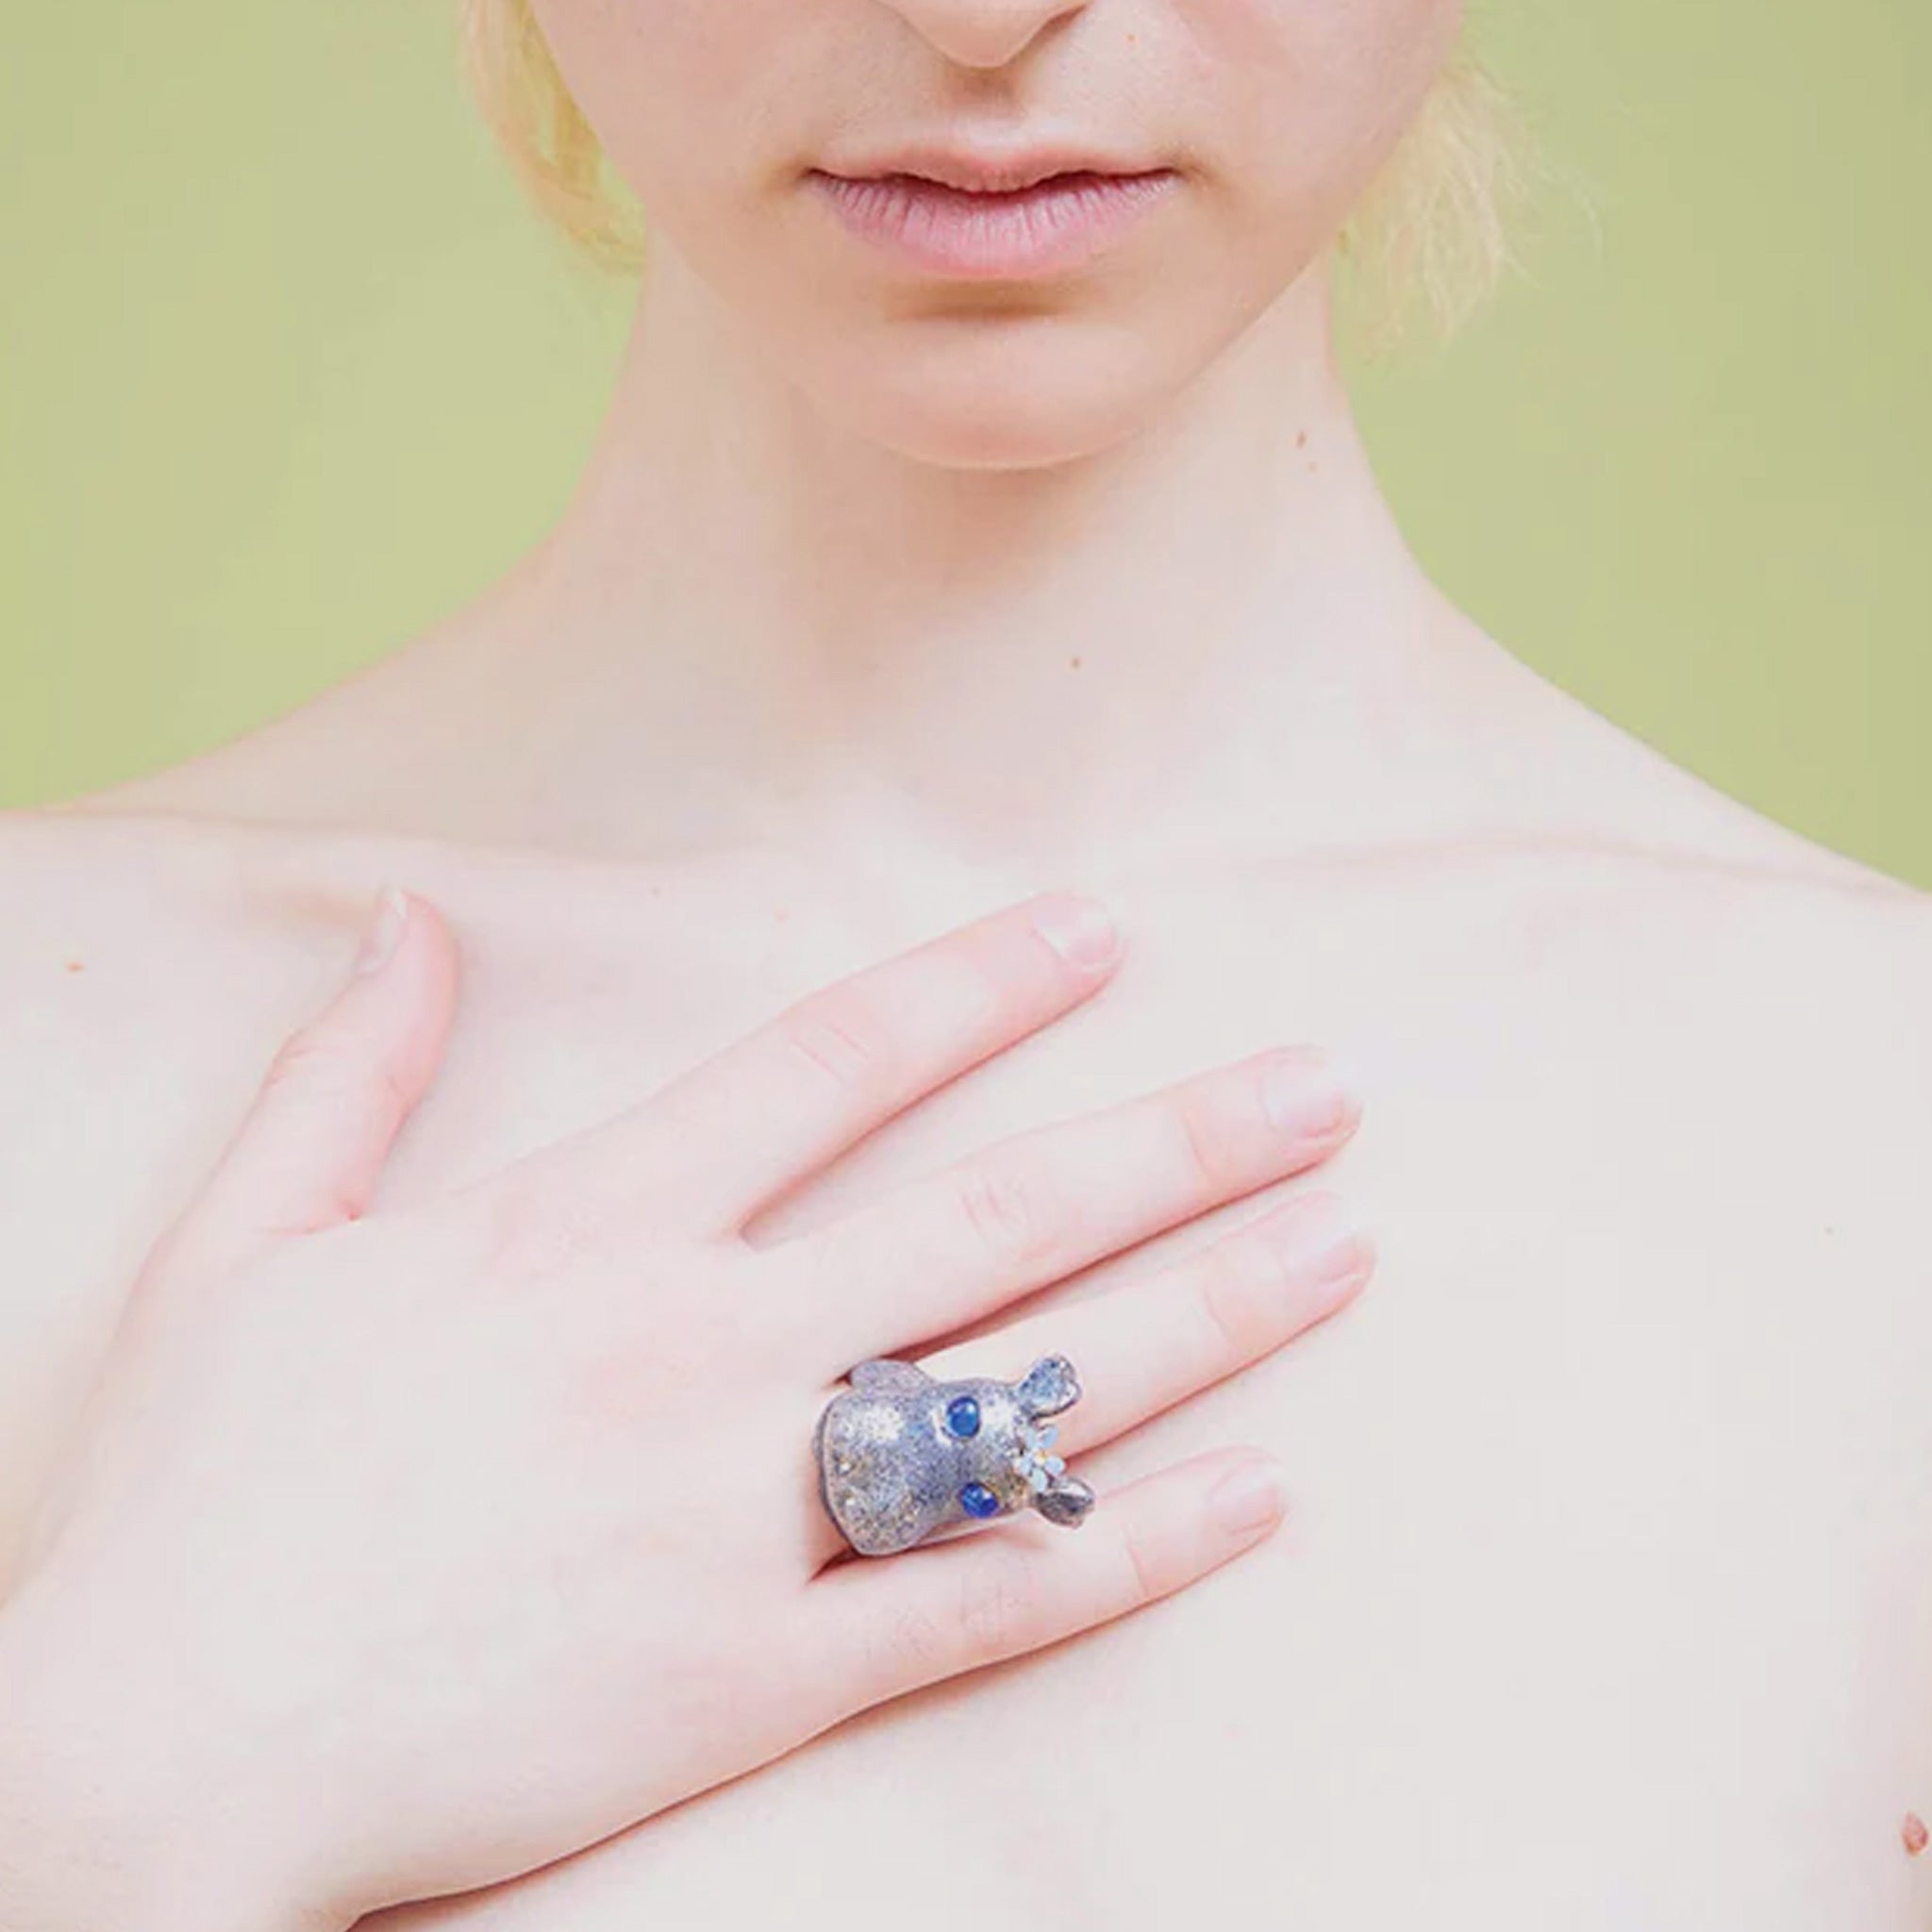 A model wears the Hippo Ring, a recycled pewter ring formed in the shape of a hippopotamus head, enameled in blue and white speckled paint with blue glass eyes.